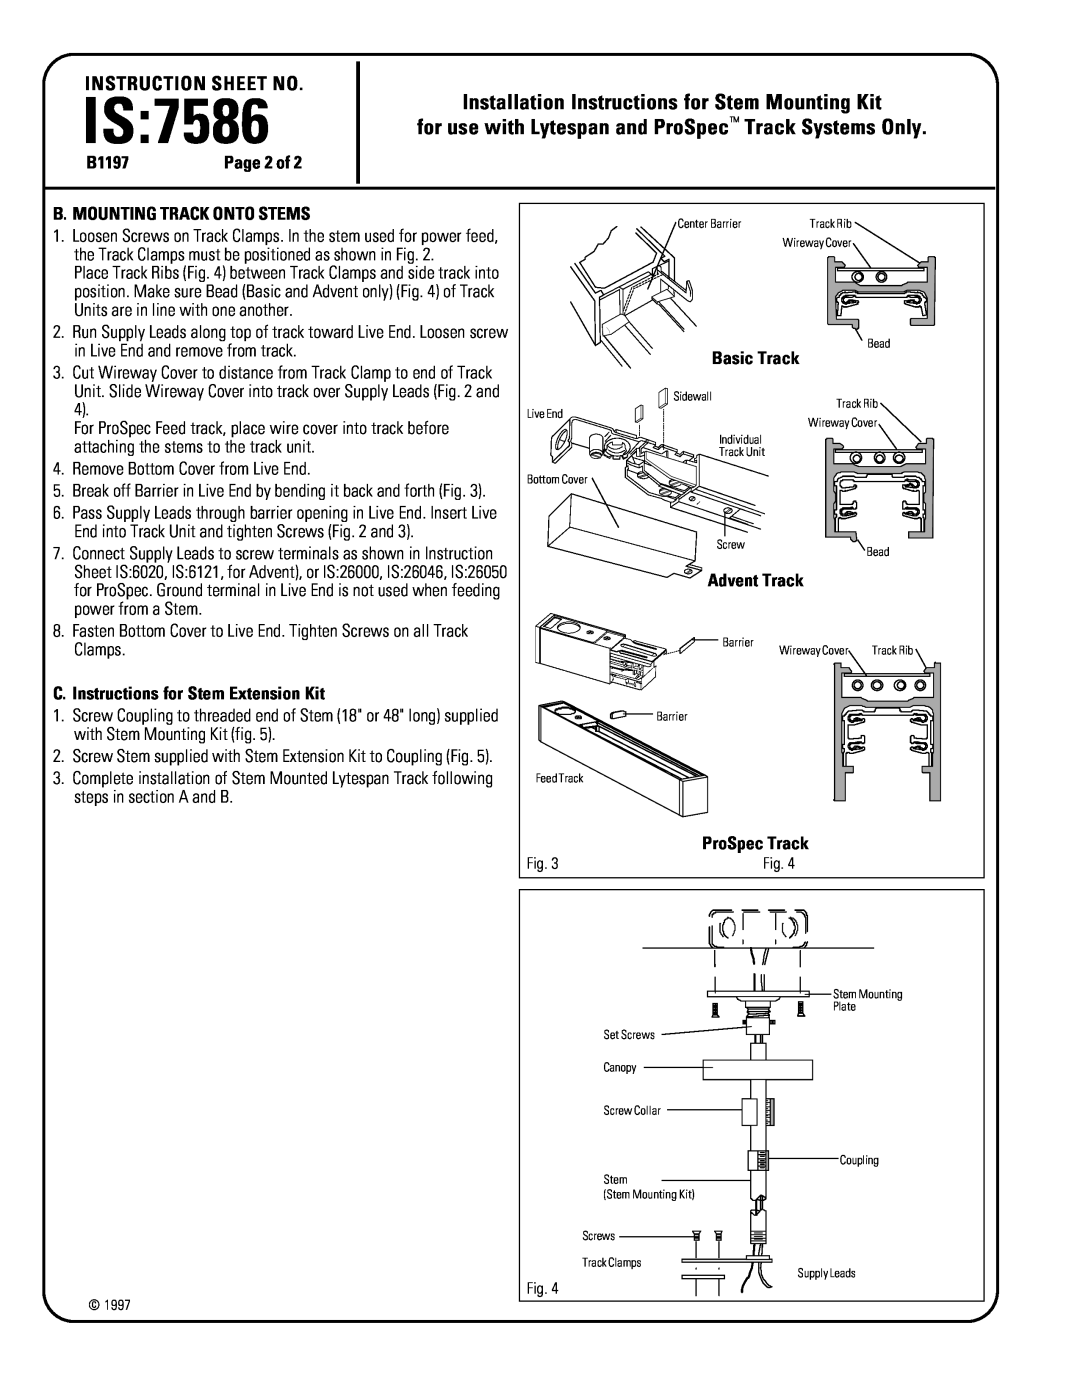 Lightolier IS:7586 Is, Installation Instructions for Stem Mounting Kit, Instruction Sheet No, B1197, Basic Track 